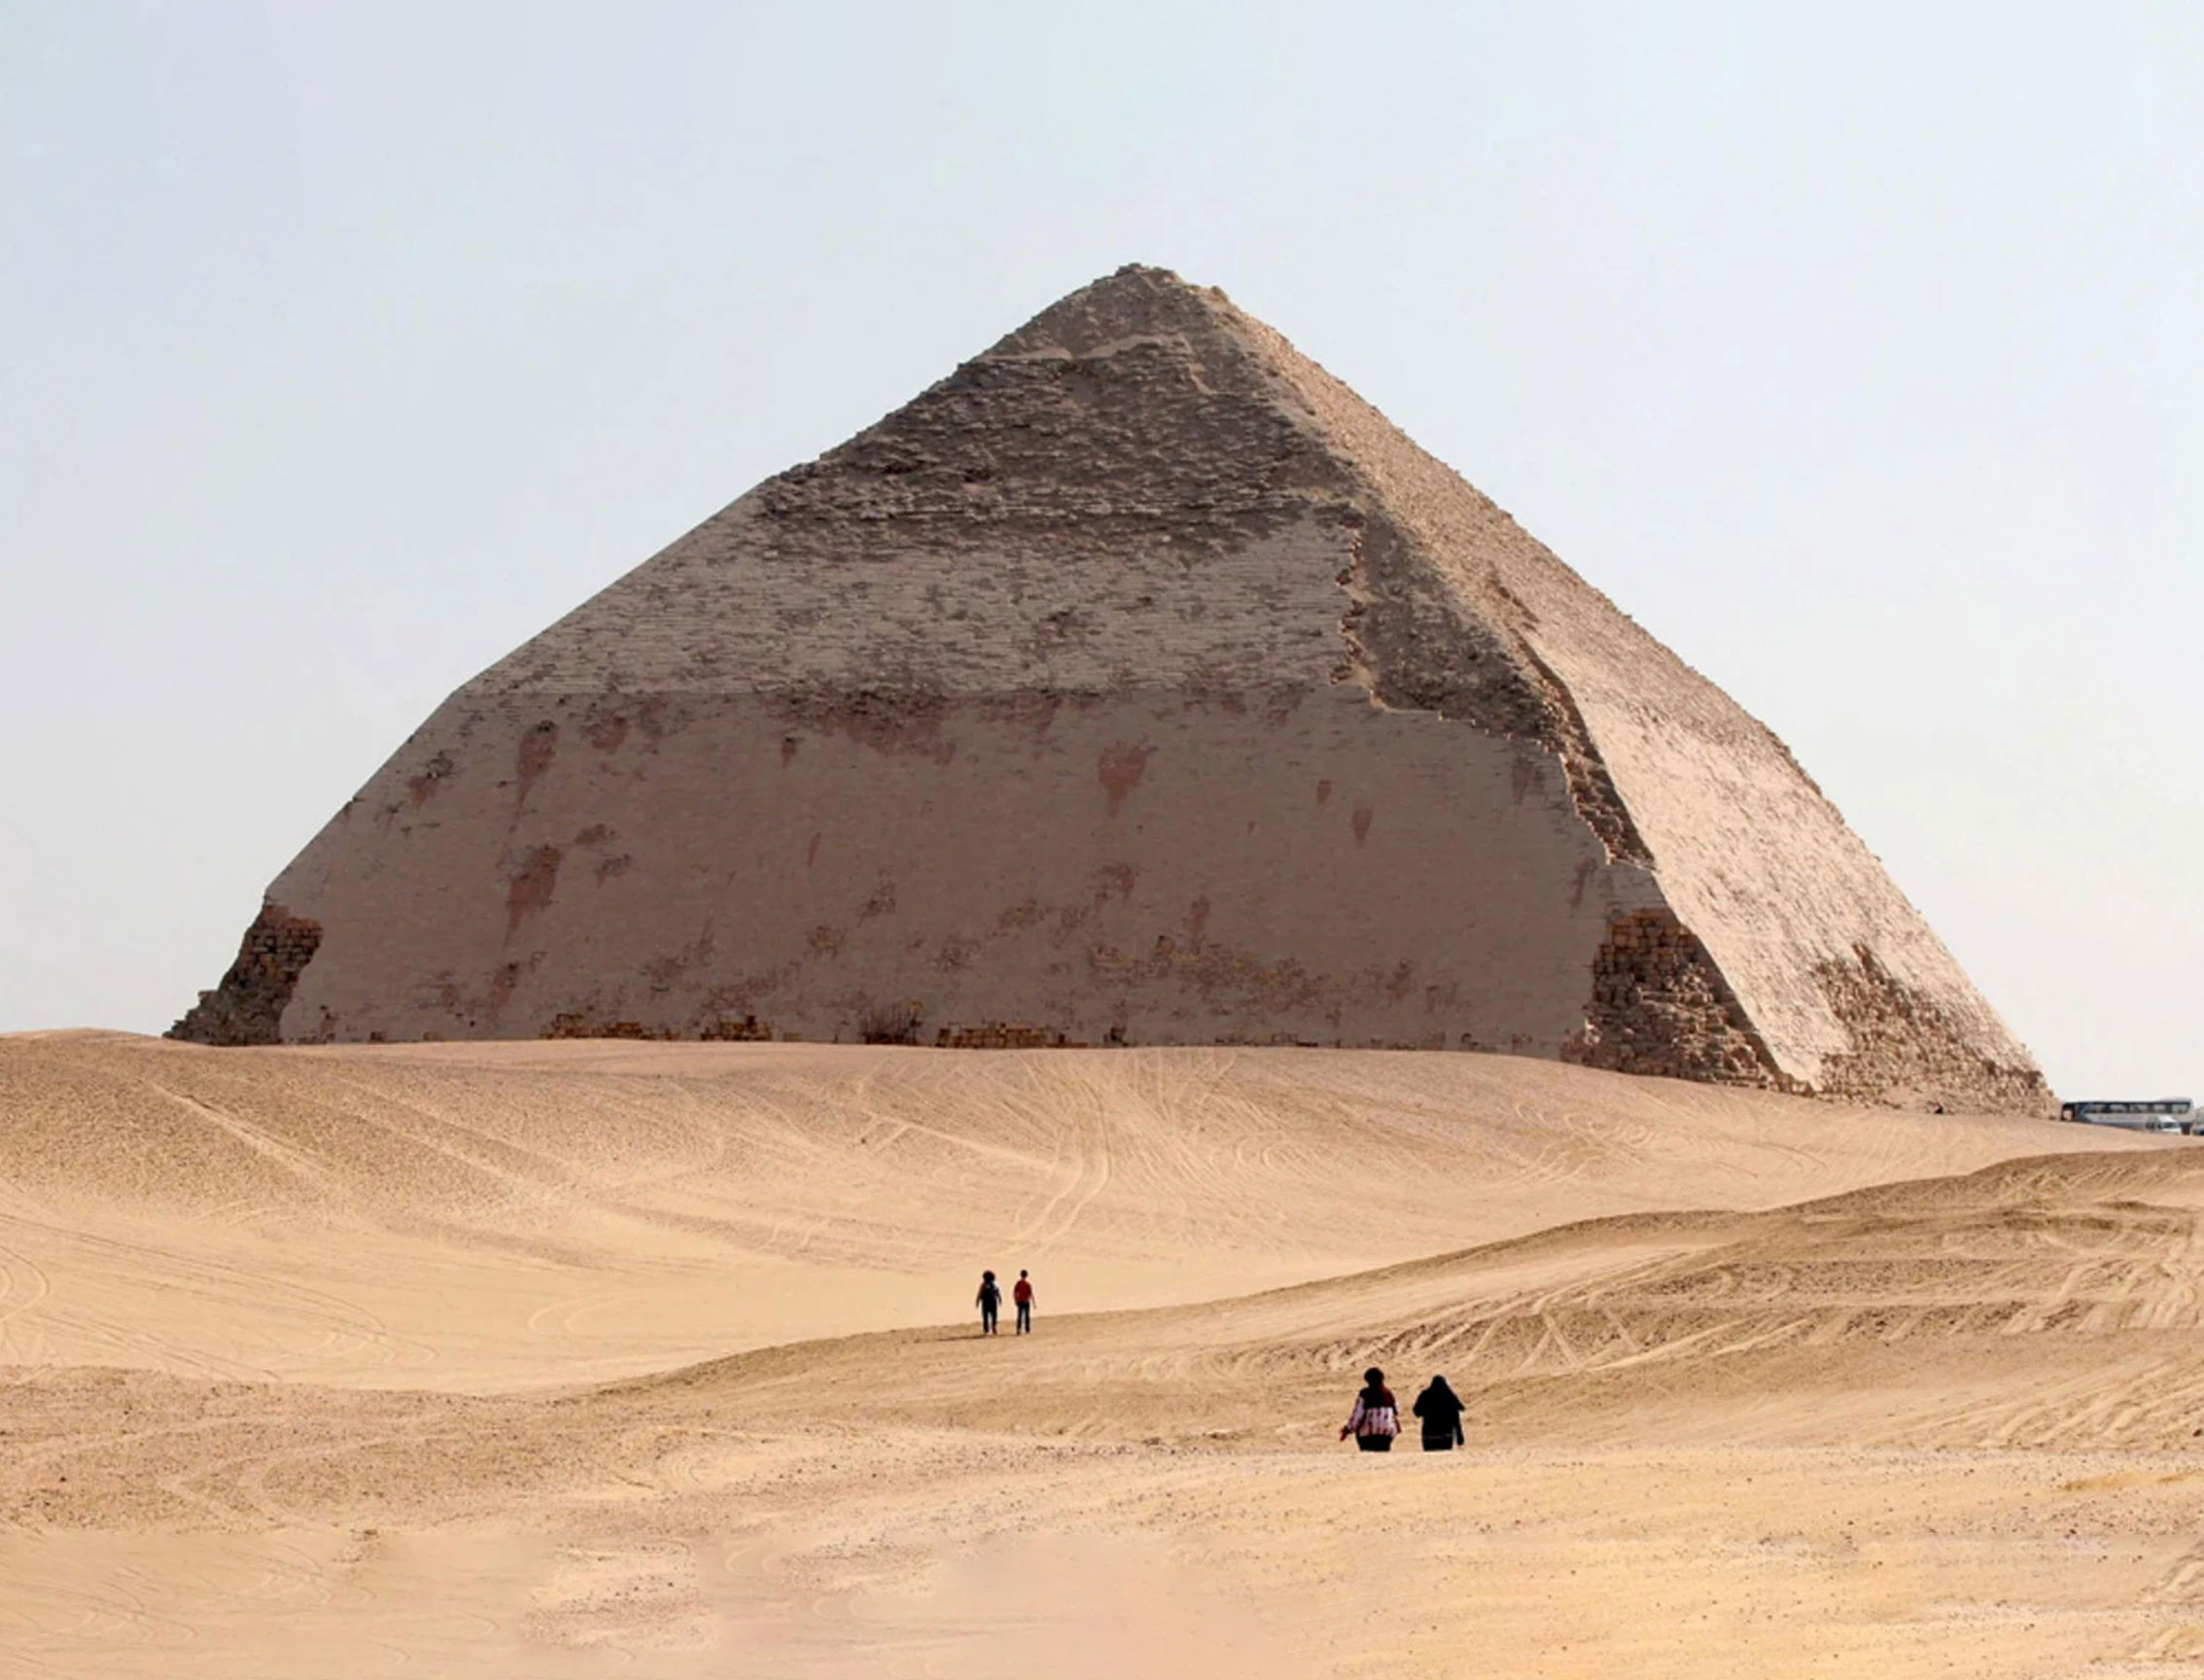 Practice Pyramids, Egypt. Tombs for Solitary Individuals.